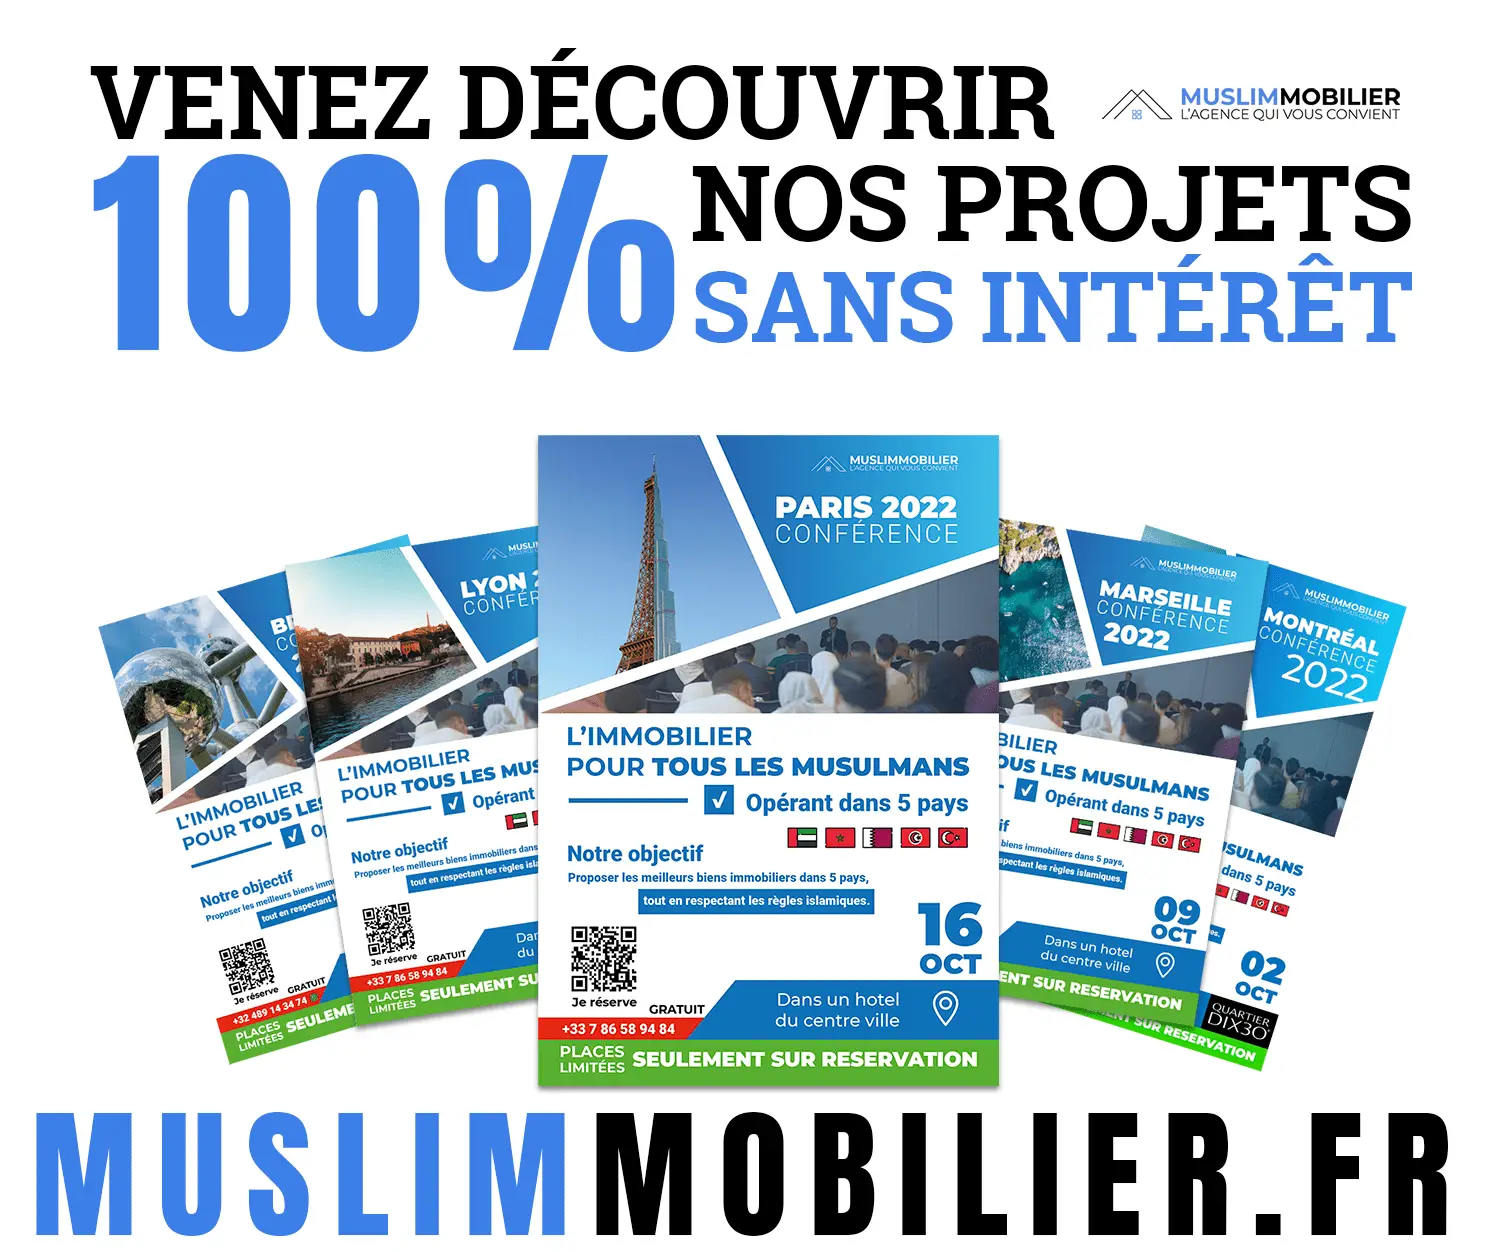 Muslimmobilier carr�